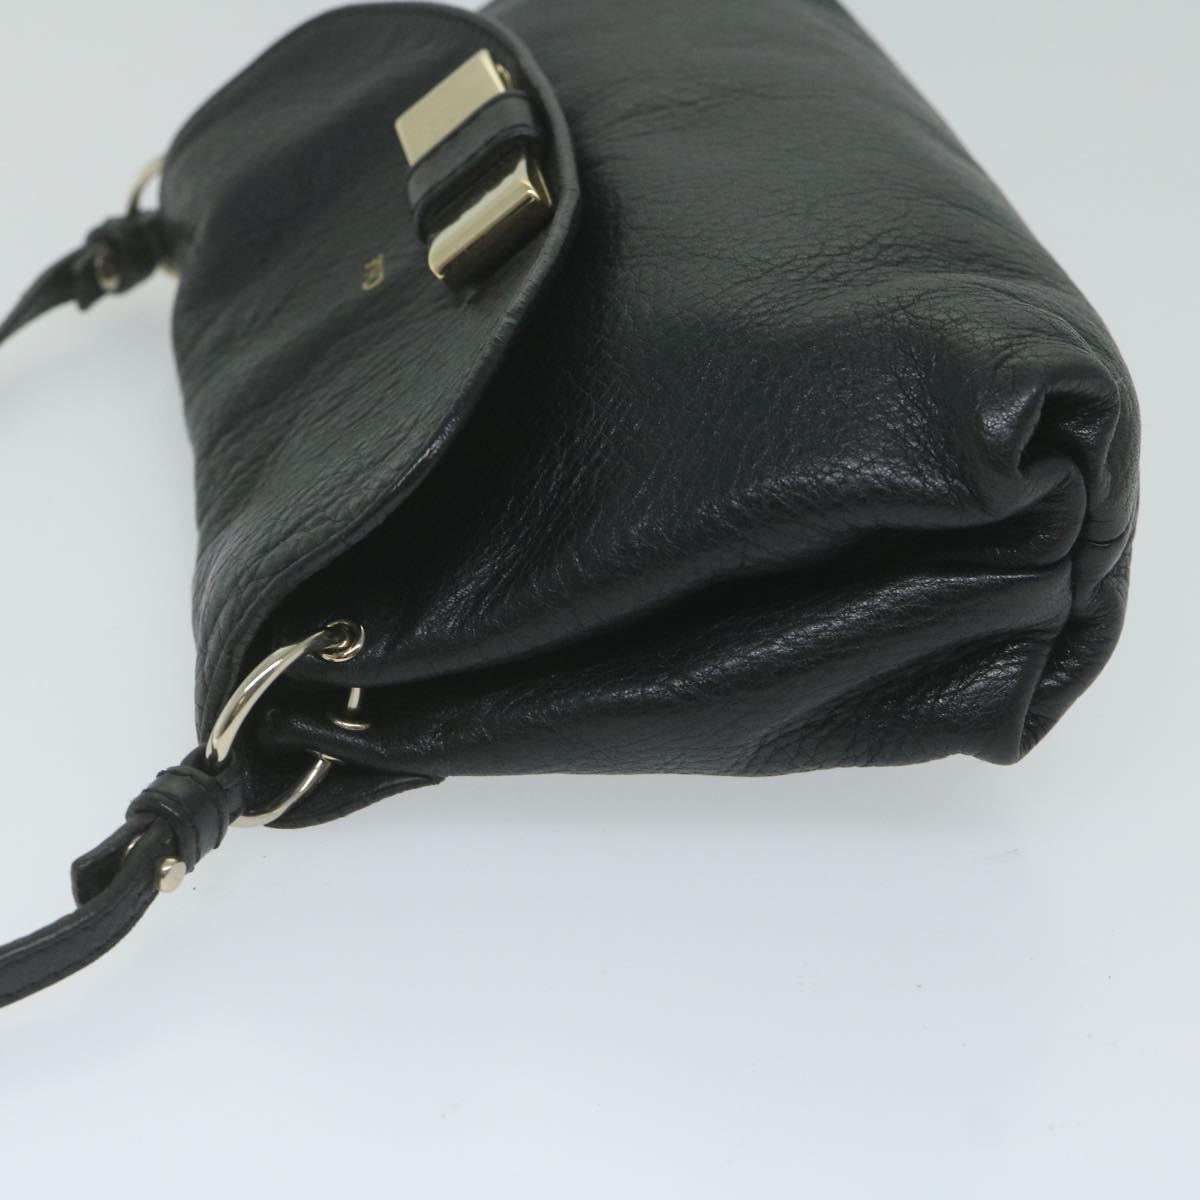 Chloe Lily Hand Bag Leather Black Auth yk9868